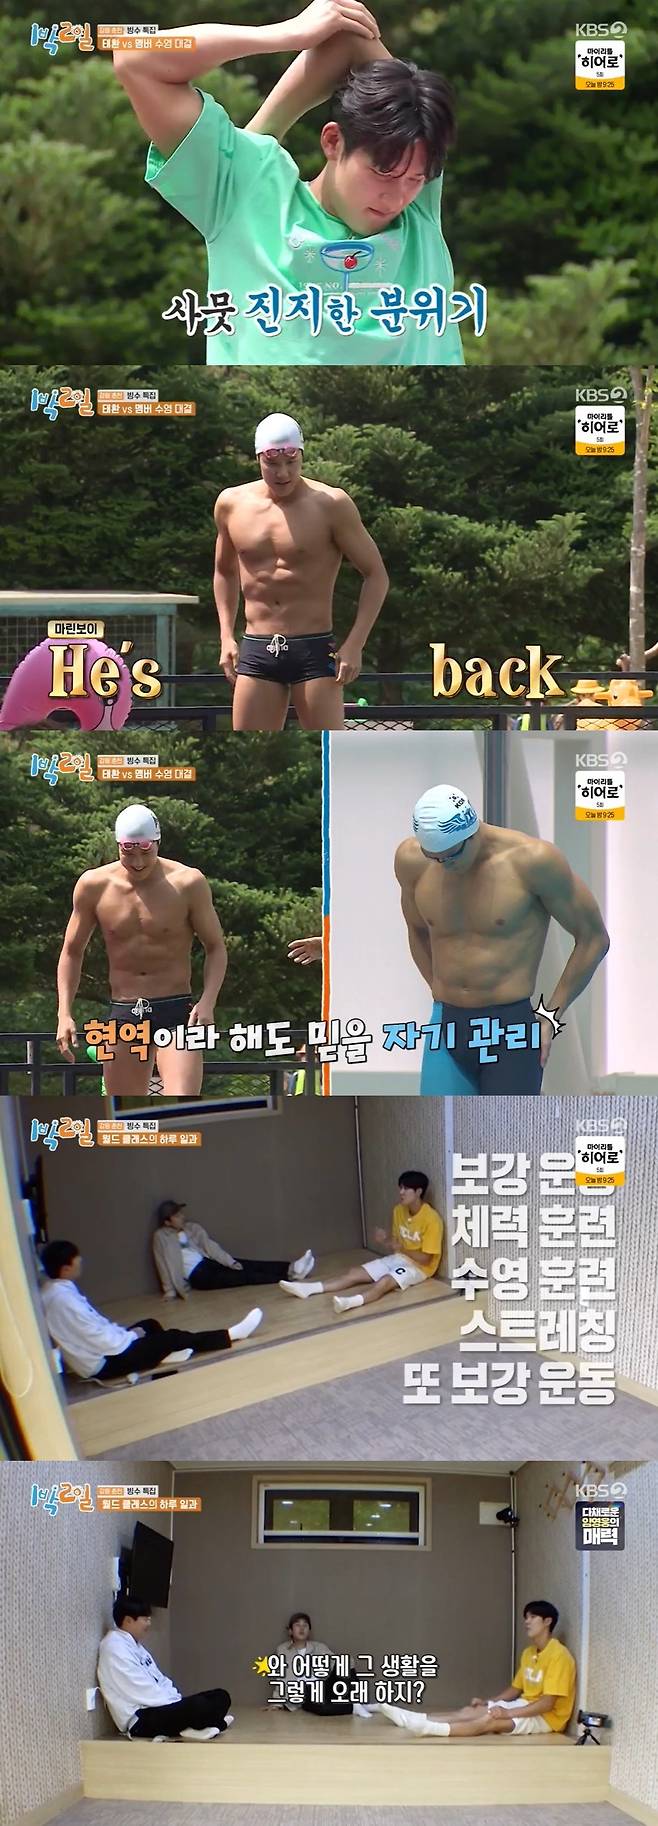 Former Sooyoung national team Park Tae-hwan revealed why he avoids water.On June 25, KBS 2TV Season 4 for 1 Night 2 Days featured Bingsoo with Park Tae-hwan and Cha Jun-hwan.The production team proposed the 1:7 Sooyoung Battle of Park Tae-hwan and members.Park Tae-hwan said, Its been a long time since I left that water. Is 1 night and 2 days such a broadcast? Its a bit of a scam. No Korean coach makes me do this.I stay as far away from Sooyoung as possible. It could be a dirty story, but I dont even take a shower after the Olympics, he said.Park Tae-hwan, who has been a national representative since the third grade of junior high school in 2004, said that he had been trained for a long time, saying, After the World Championships, there is the Asian Game, then the World Championships and then the Olympics.Mun Se-yun said, I did not want to think about it because I trained hard and worked hard.Park Tae-hwan eventually failed to turn away from the members and production teams desperate request and responded to the Battle.Park Tae-hwan, who had a 2: 6 battle with Mun Se-yun as a team, relaxed in a serious atmosphere.Park Tae-hwan, who has changed into Sooyoung suit for a long time, boasts unchanging Pacific shoulders and solid muscles.Kim Jong-min and Yeon Jung-hoon admired the self-management that was not as active as I still have abs and I go straight into the water if I am that much.2:6 Sooyoung Battle ended with Park Tae-hwan and Mun Se-yuns victory despite Cha Jun-hwans goodwill.In the golden race of Park Tae-hwan, members applauded, Its too sexy to actually see this.On the other hand, Park Tae-hwan, Yeon Jung-hoon, and DinDin, who won the Tube Bed Highland, enjoyed a free trip to relax in the campsite.When DinDin asked about his routine as a player, Park Tae-hwan said, I woke up at 4:15 am.Yeon Jung-hoon and DinDin said, Olympic athletes and regular athletes have different Game, and How did you do that for so long?